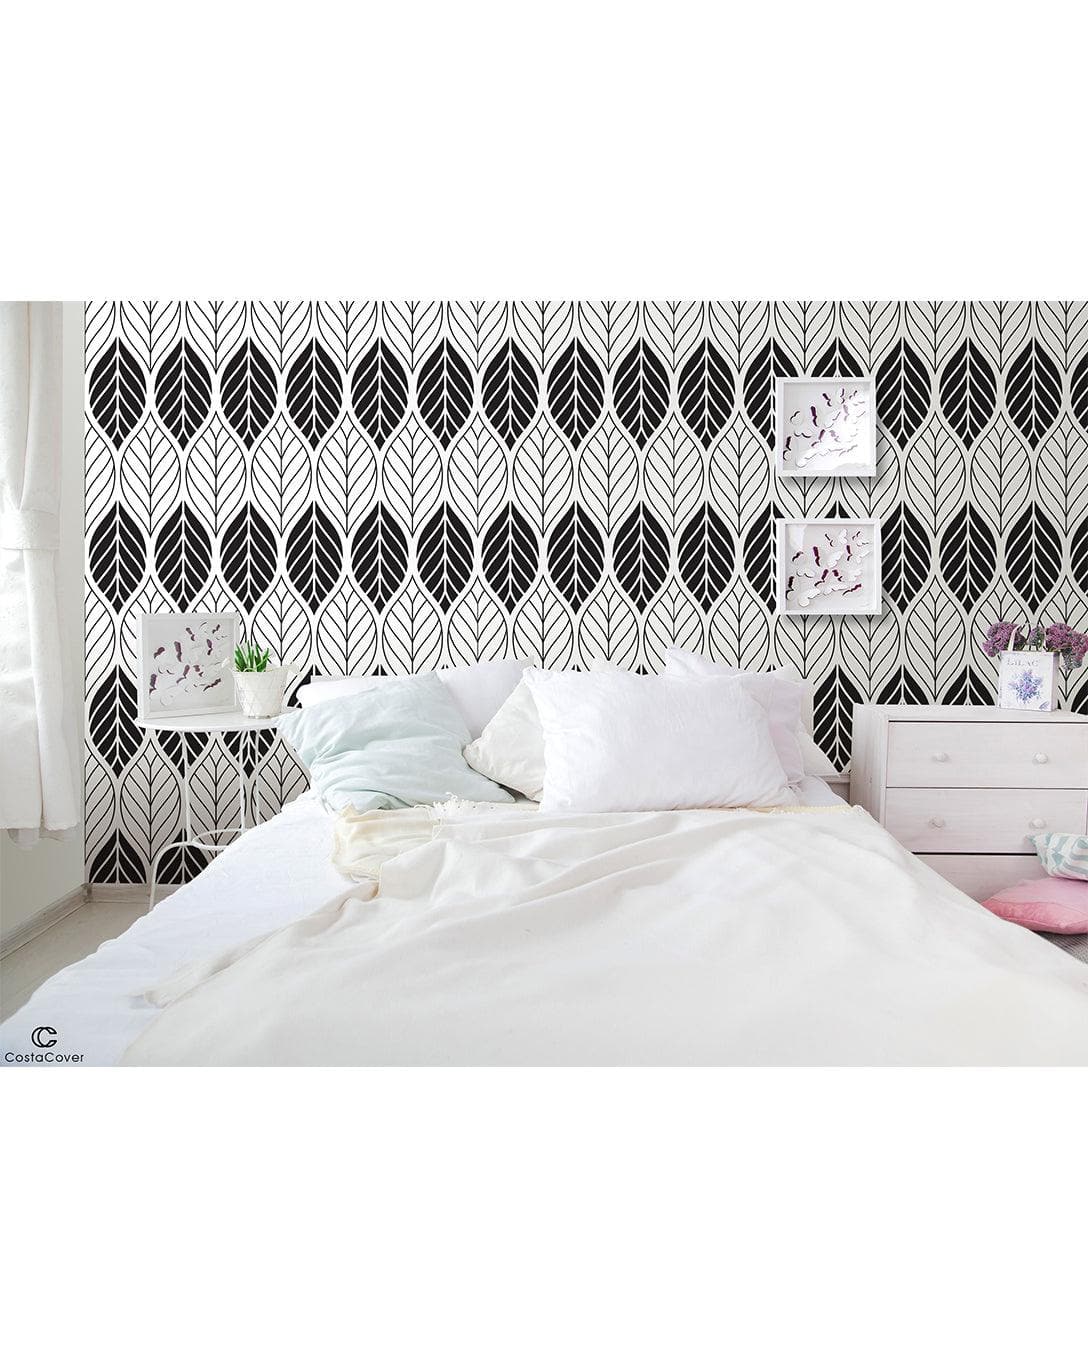 Black White Floral Geometric Leaves Removable Wallpaper Black White Floral Geometric Leaves Removable Wallpaper Black White Floral Geometric Leaves Removable Wallpaper 